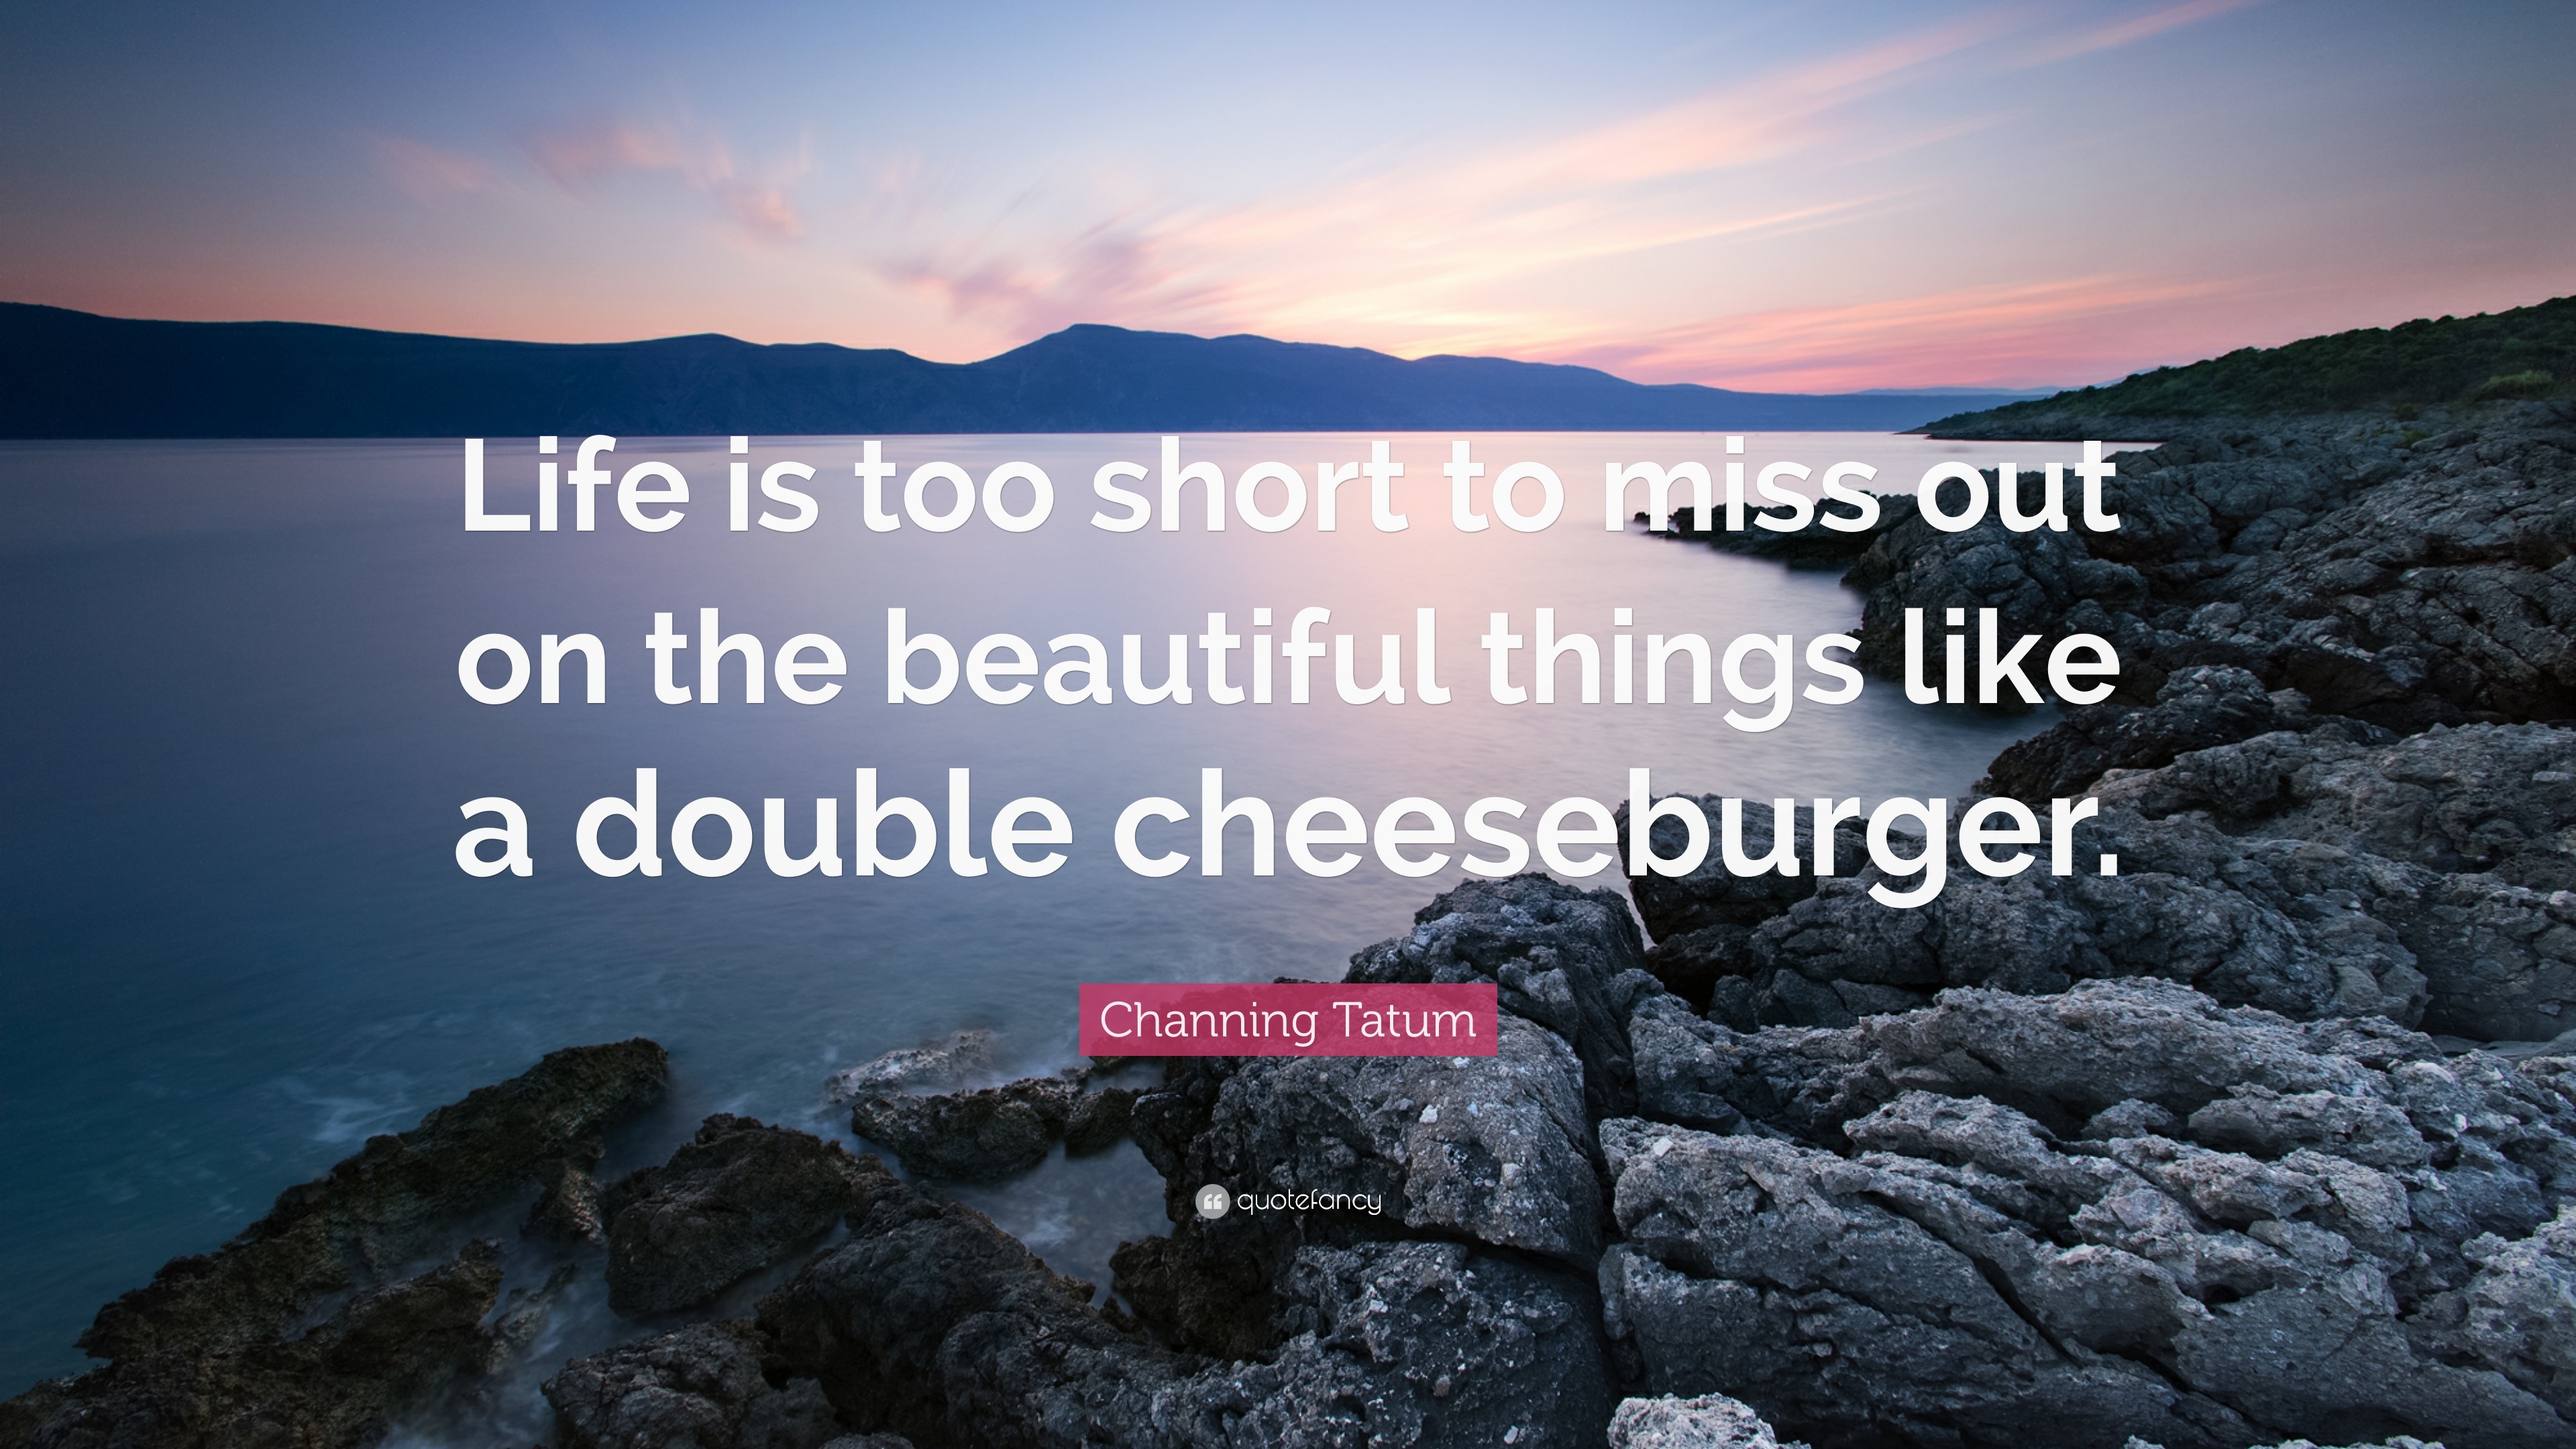 Channing Tatum Quote “Life is too short to miss out on the beautiful things